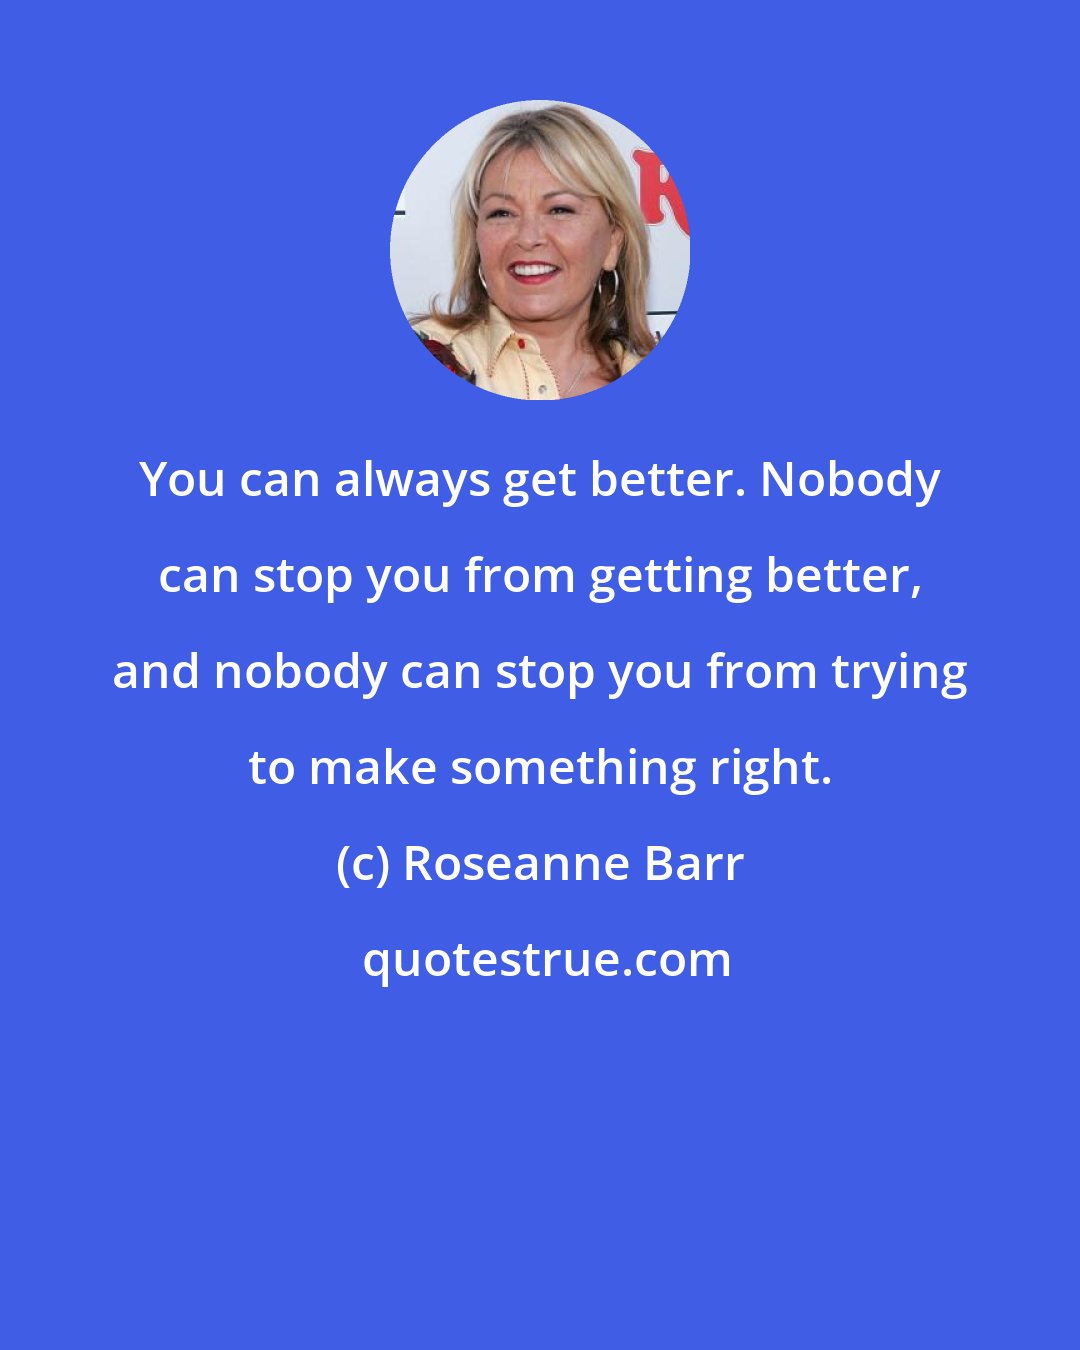 Roseanne Barr: You can always get better. Nobody can stop you from getting better, and nobody can stop you from trying to make something right.